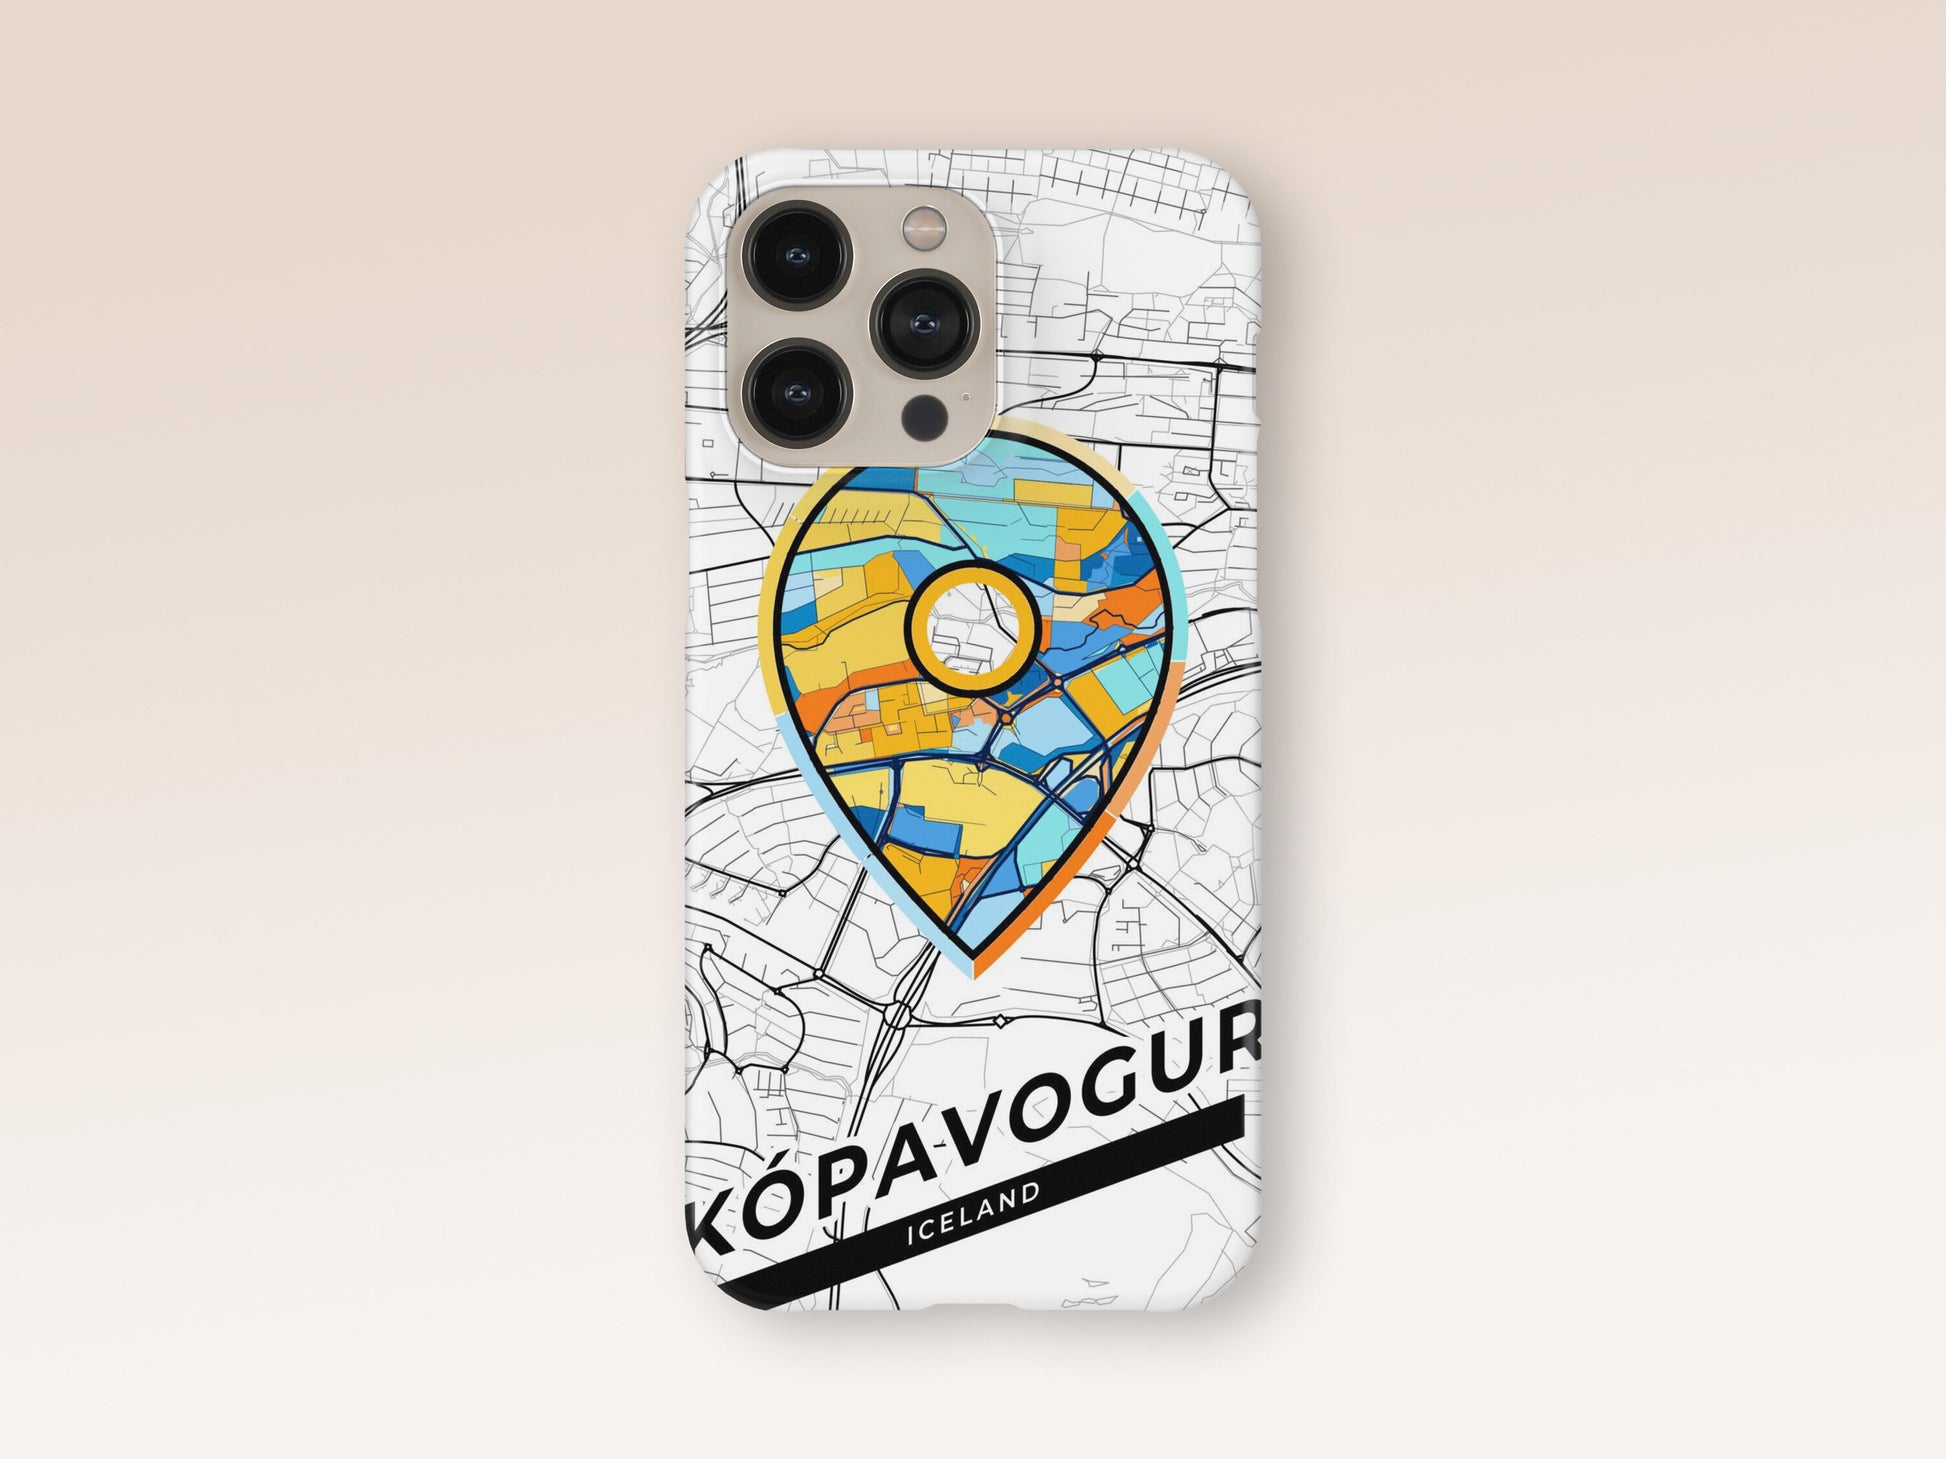 Kópavogur Iceland slim phone case with colorful icon. Birthday, wedding or housewarming gift. Couple match cases. 1